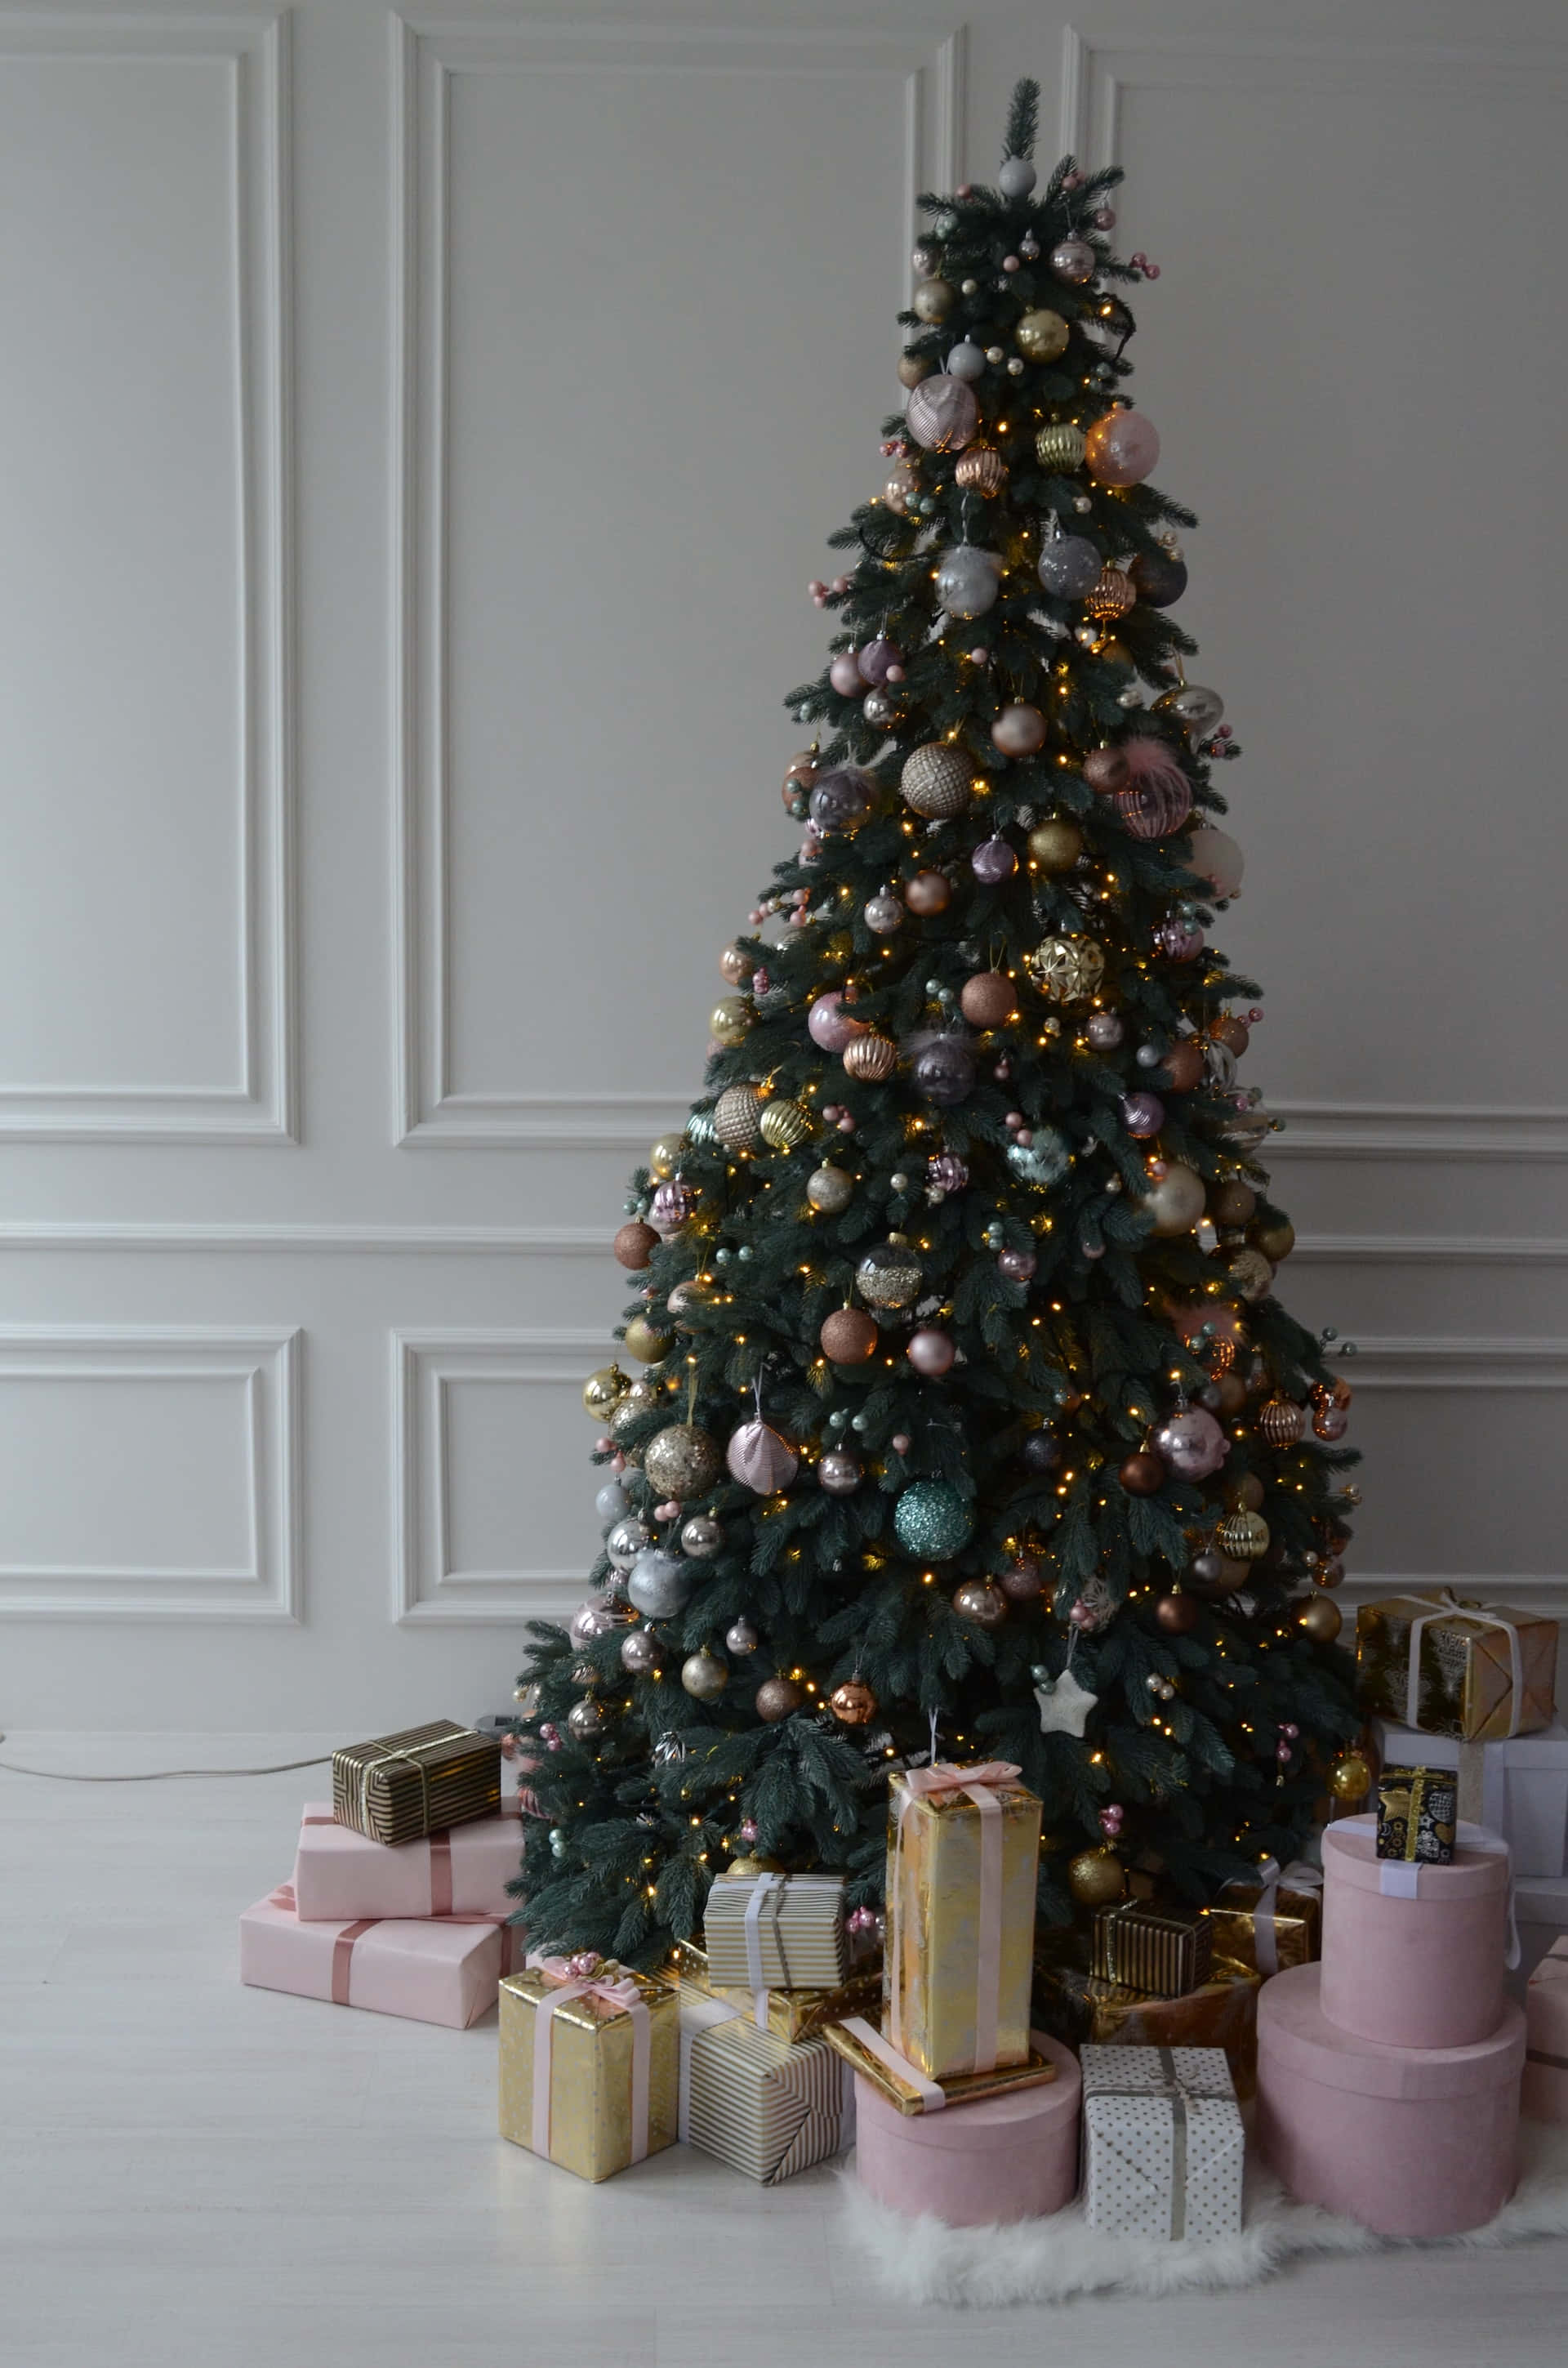 A Christmas Tree With Presents On The Floor Wallpaper